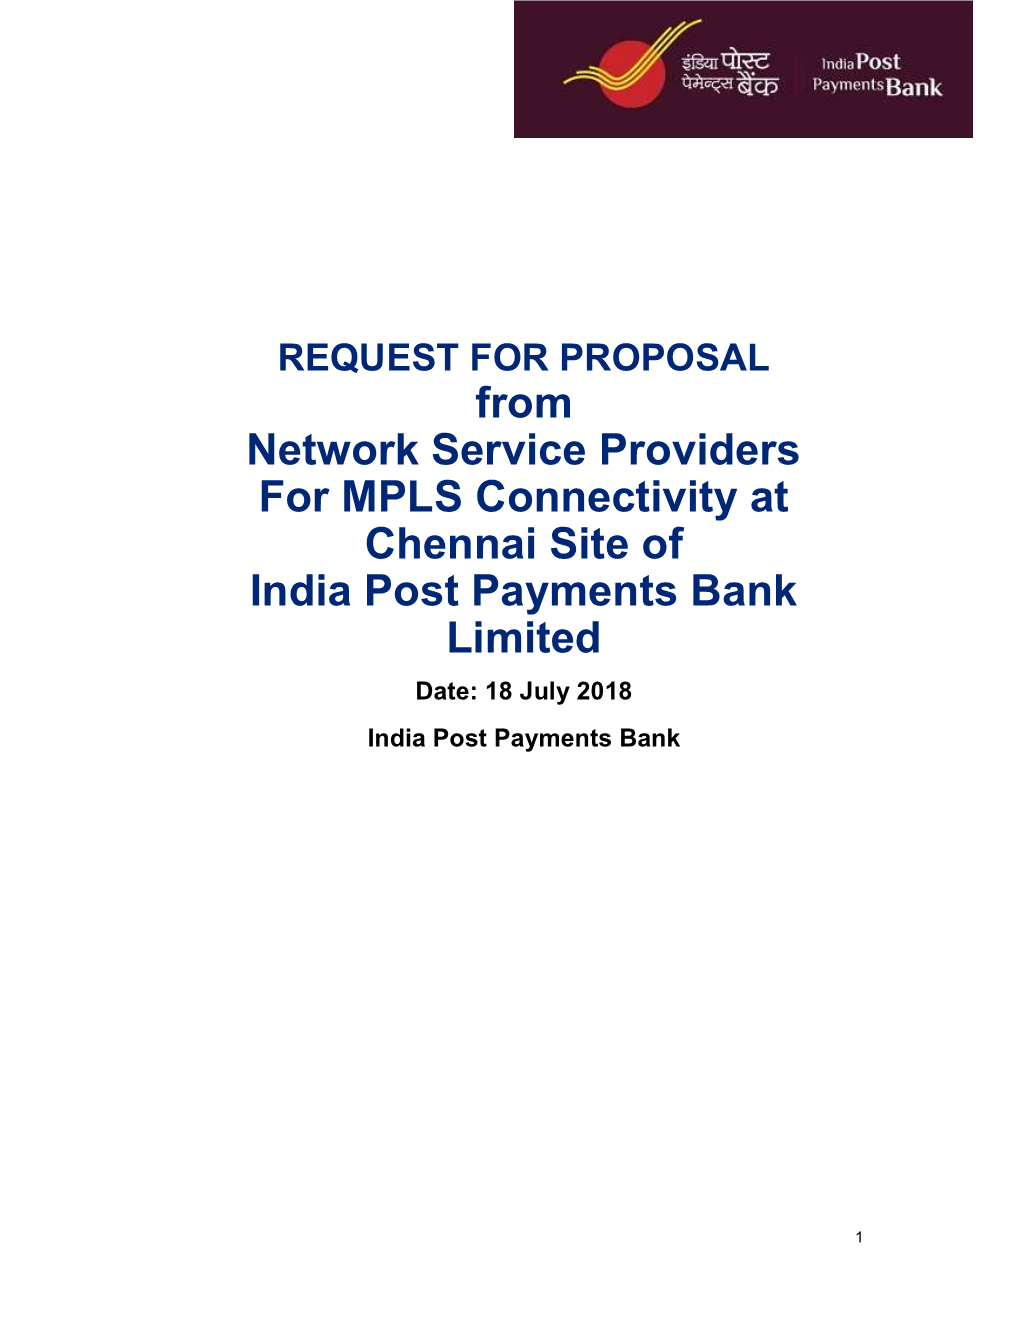 From Network Service Providers for MPLS Connectivity at Chennai Site of India Post Payments Bank Limited Date: 18 July 2018 India Post Payments Bank